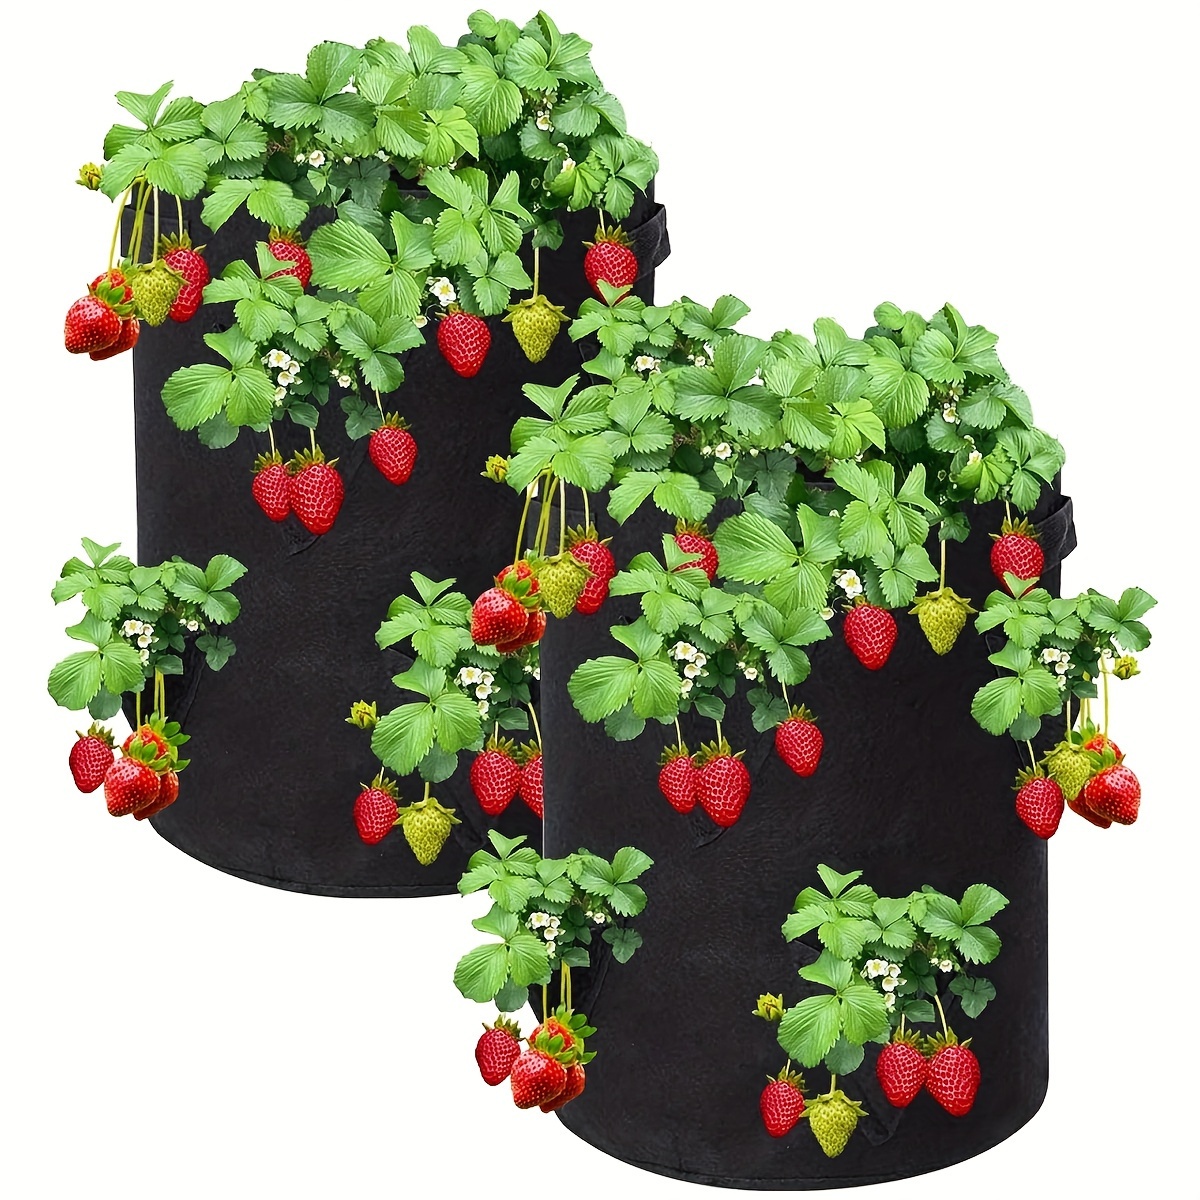 

Strawberry Grow Bag, 2 Pack 10 Gallon Strawberry Plant Bag With 8 Side Planting Pockets, Breathable Felt Material Plant Container With Handles For Balcony Courtyard Gardening (black)